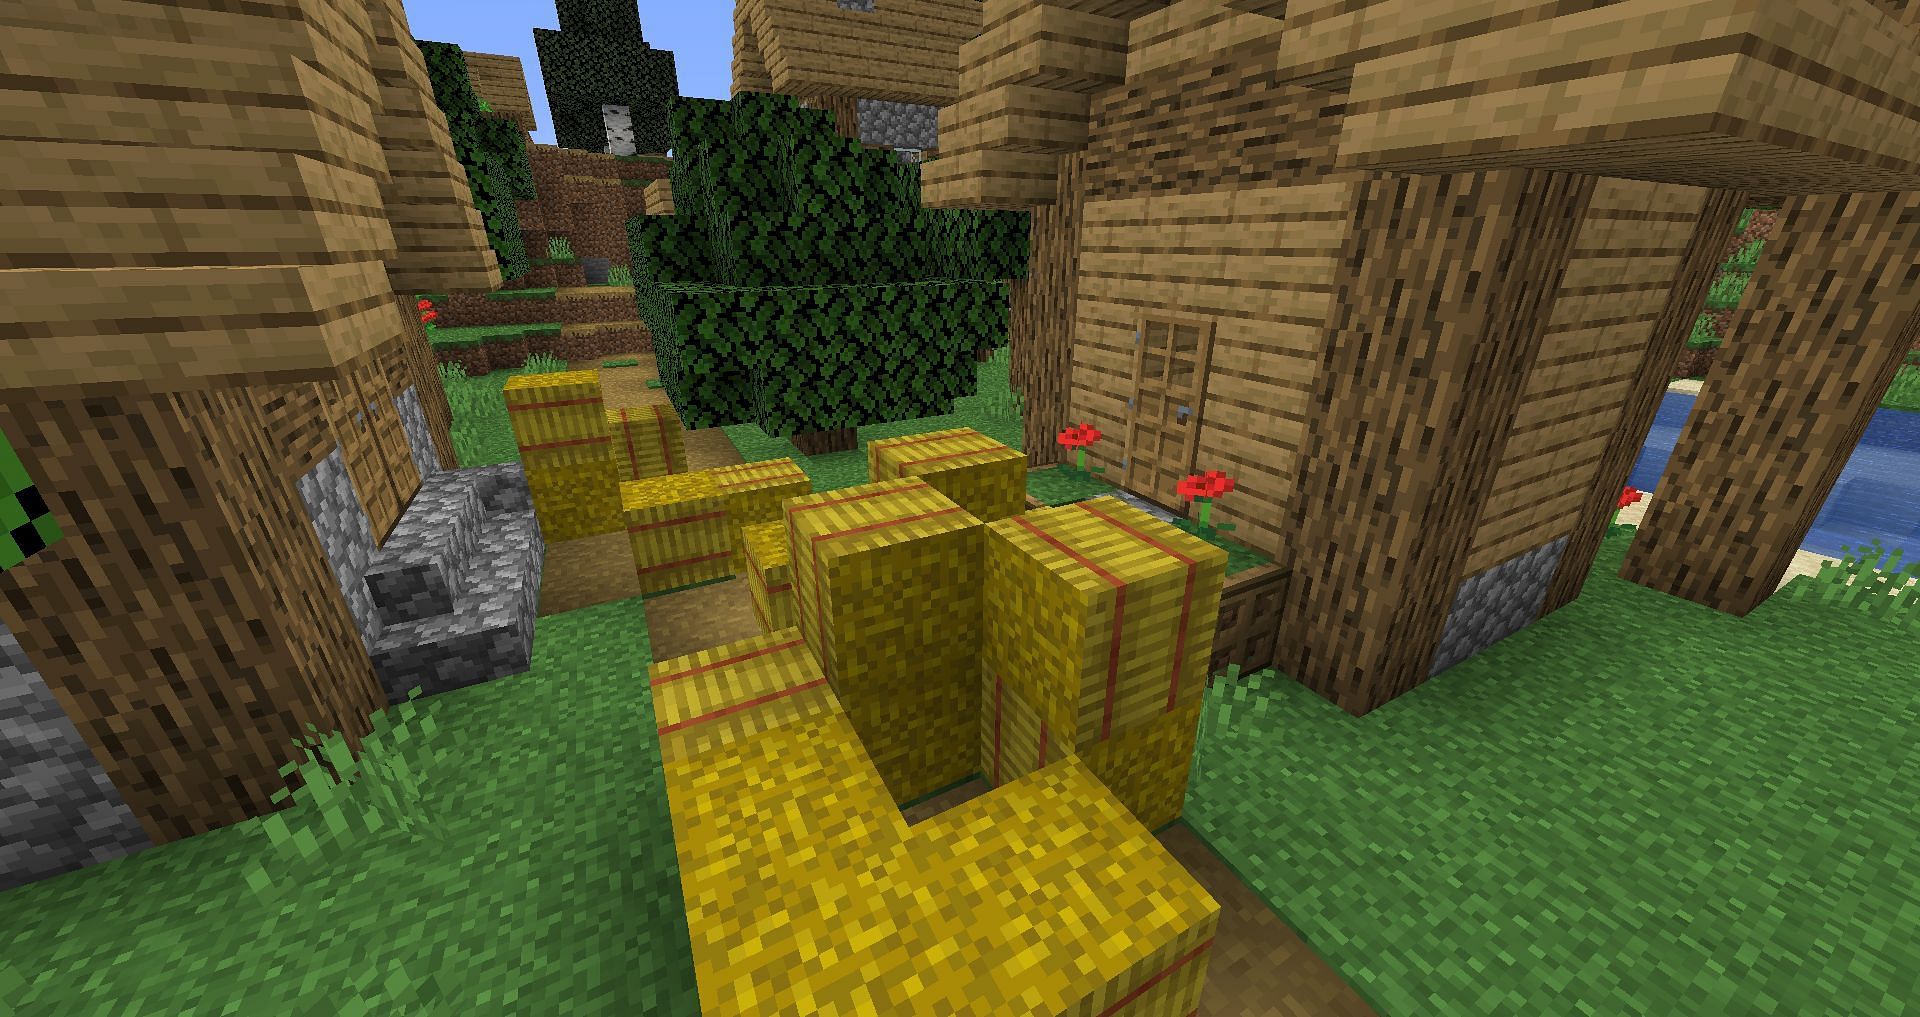 A large stack of hay bales in a village (Image via Minecraft)